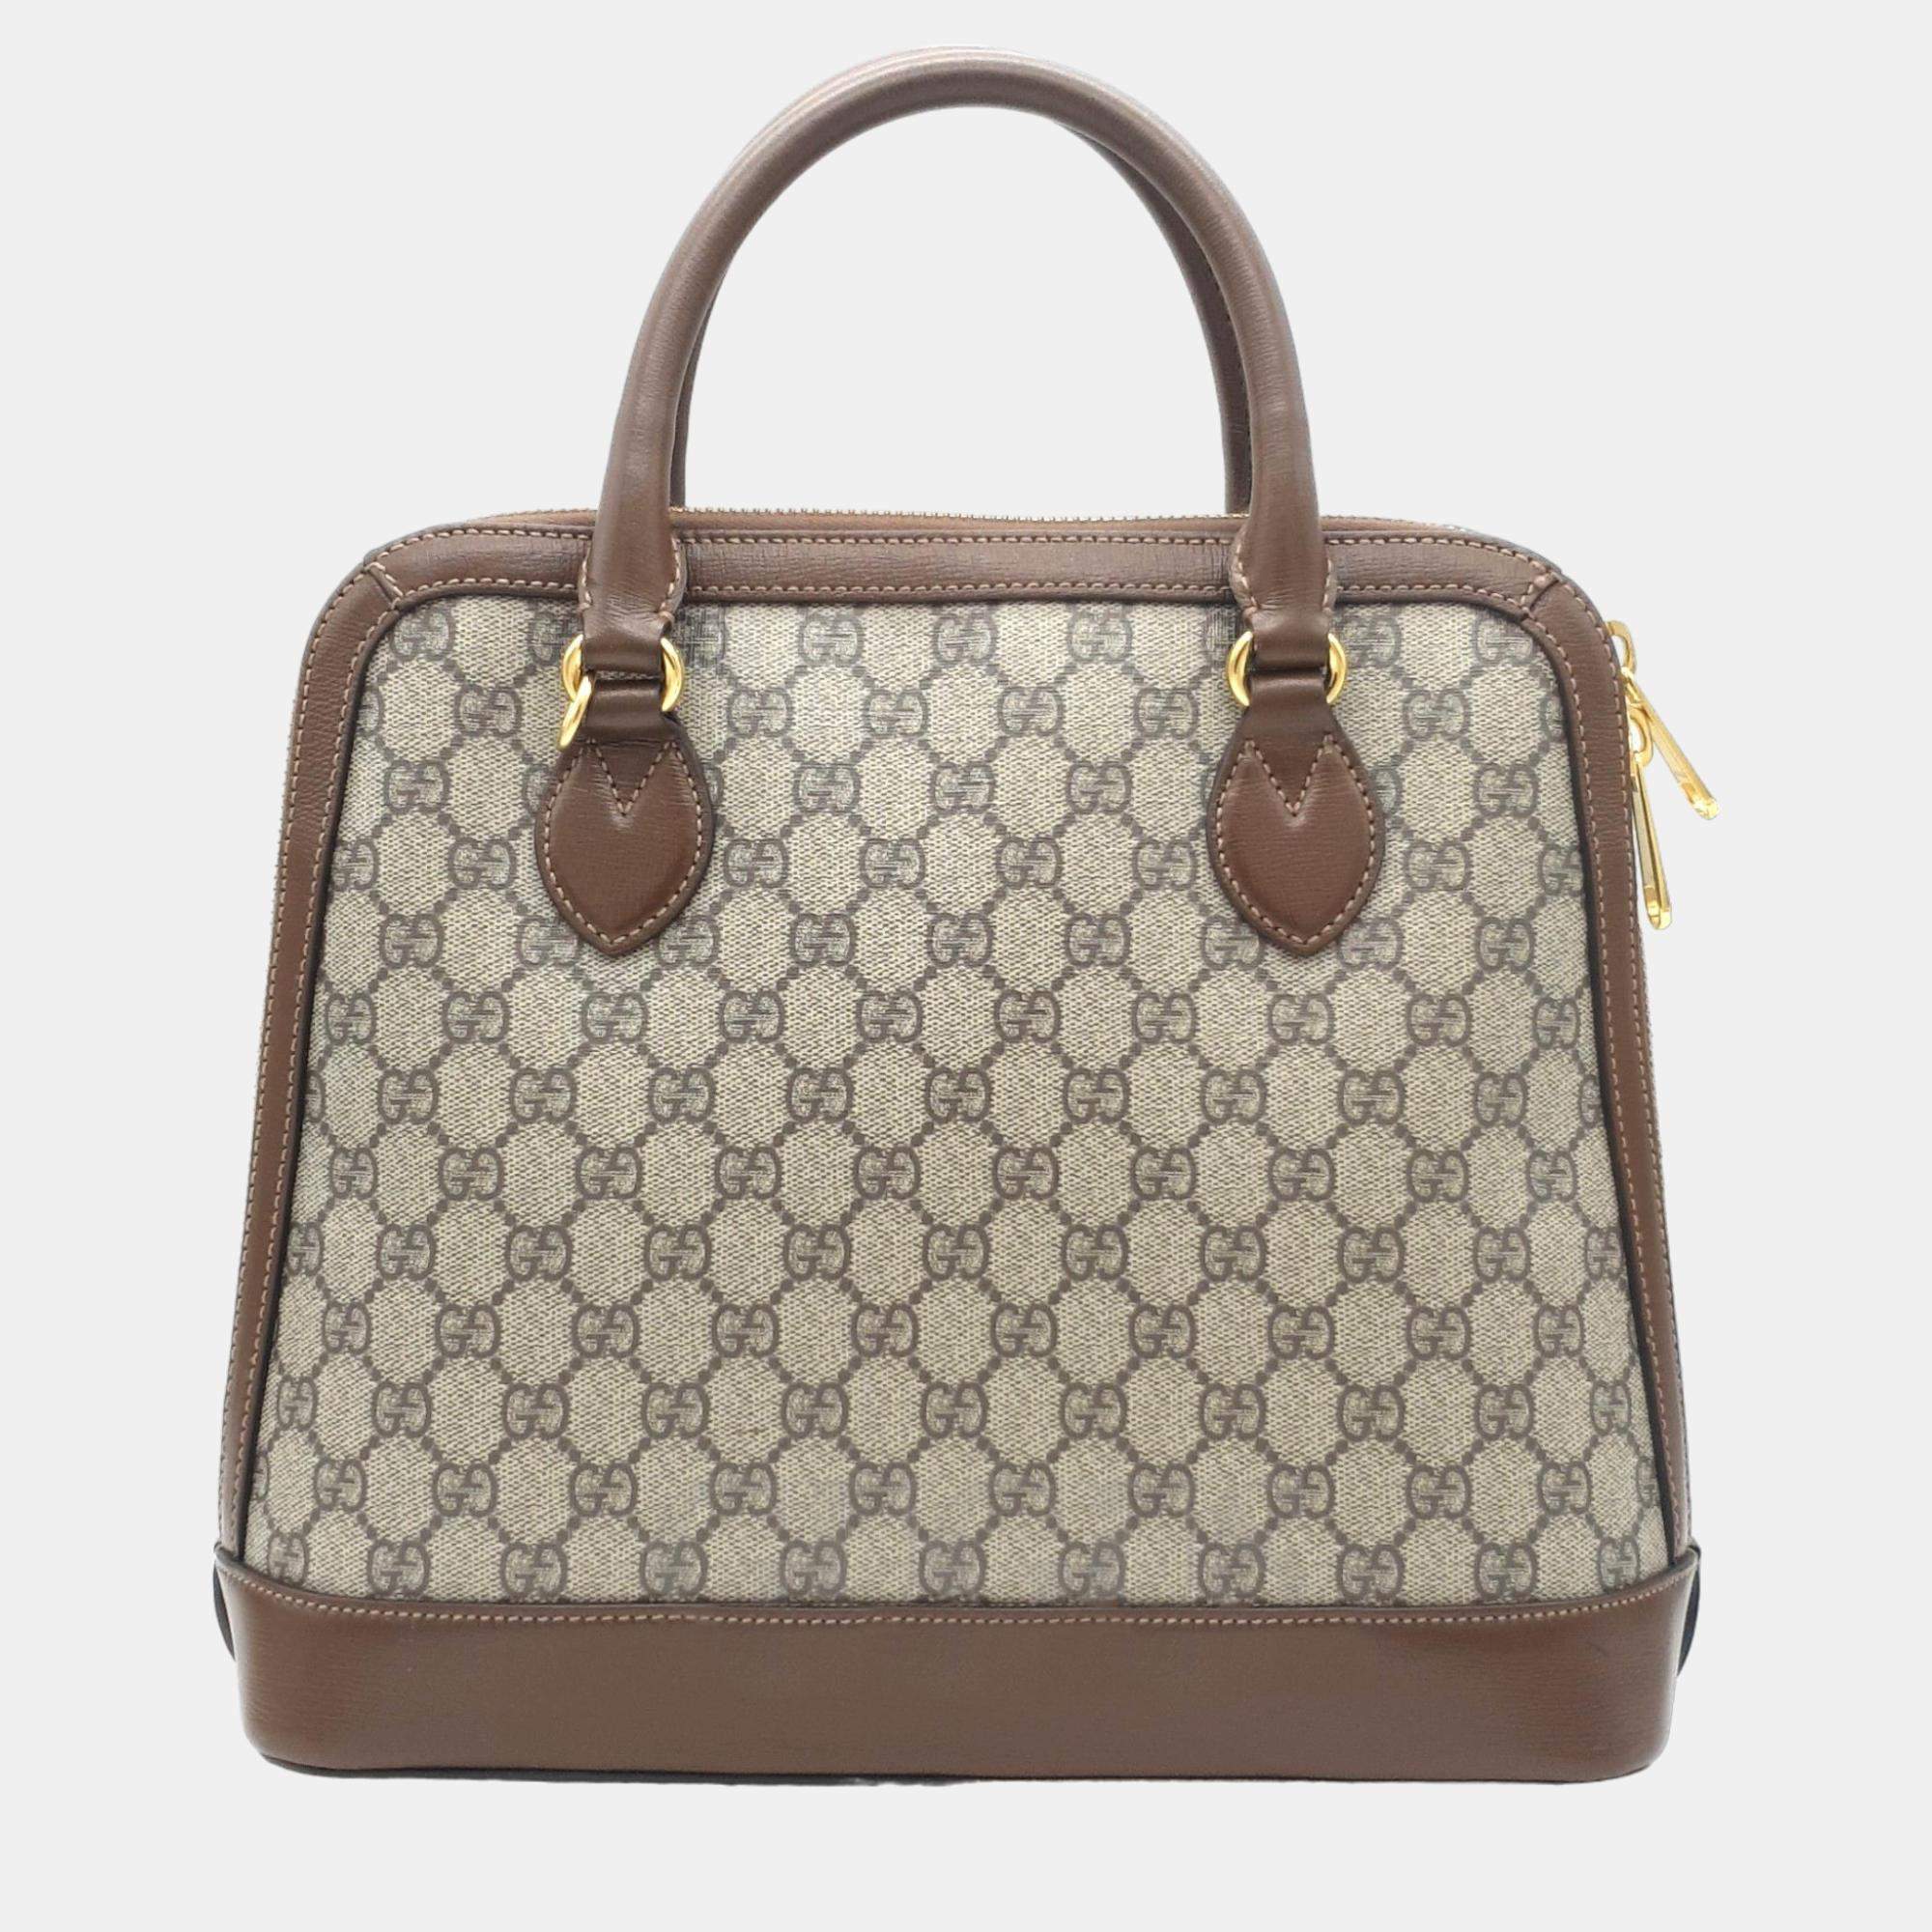 Best Gucci Bag Outfit Street Styles for Women